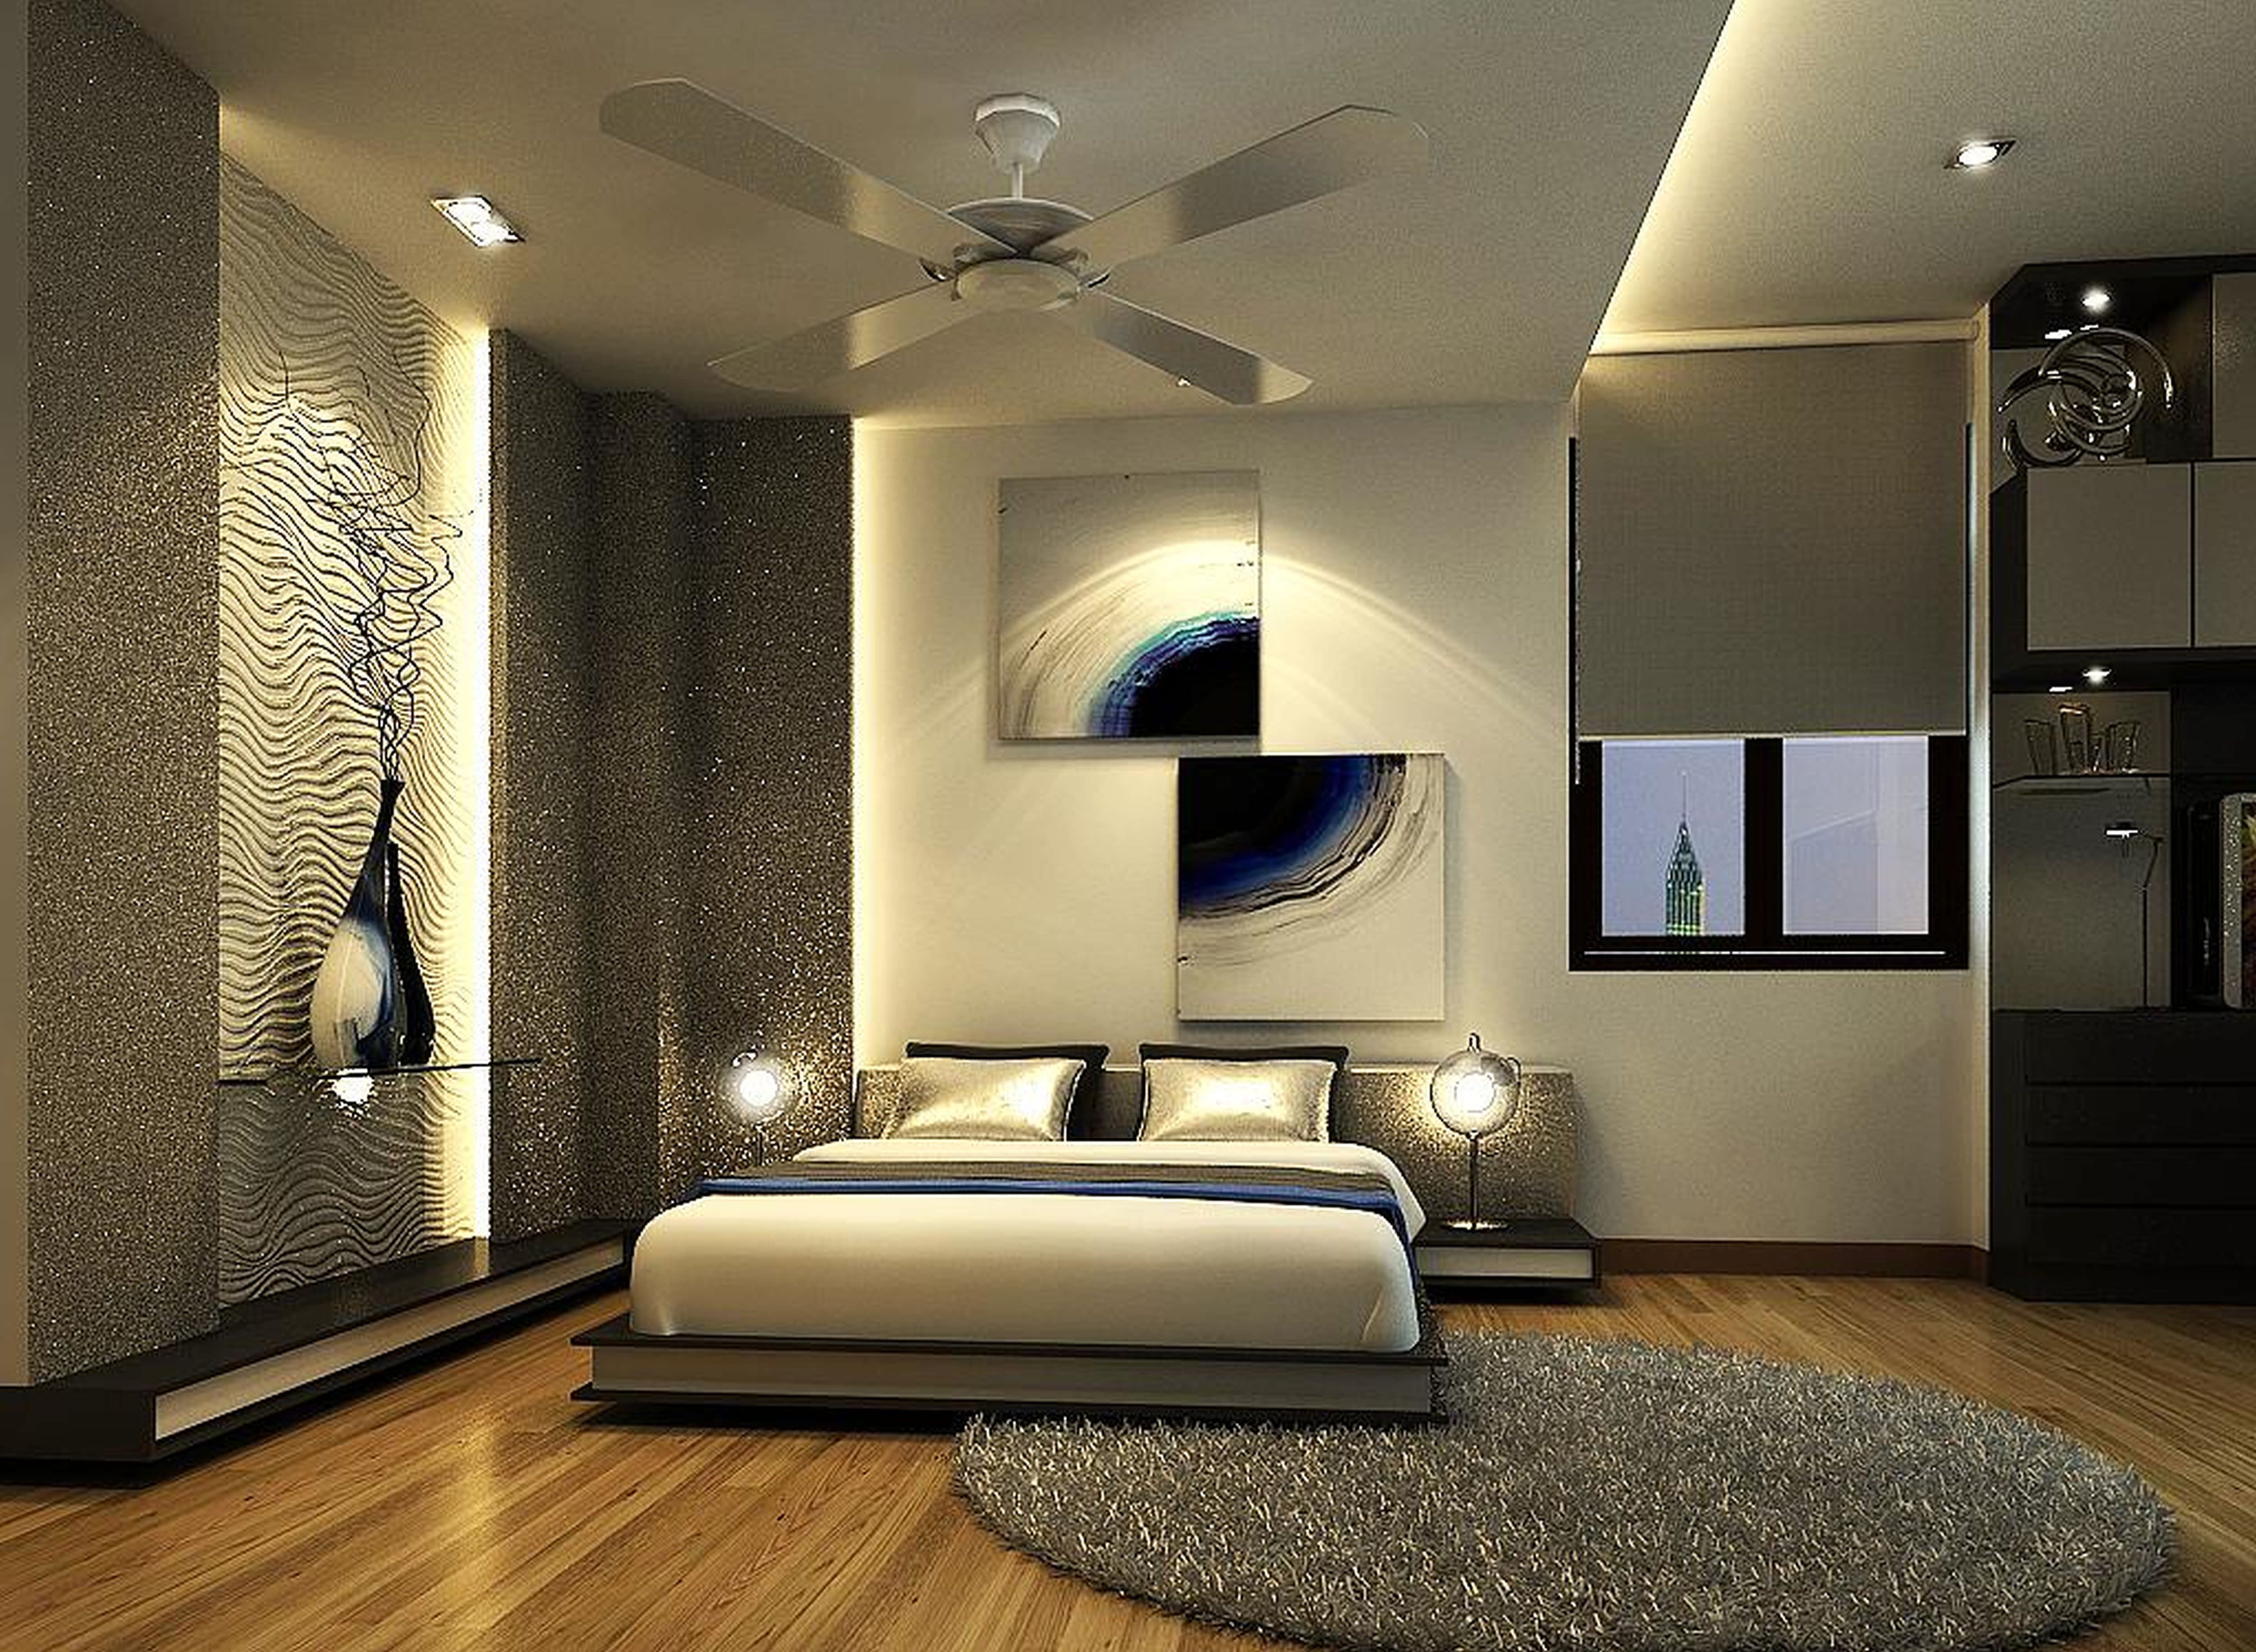 bedroom royal designs interior decorating bed bedrooms modern apartment trends beds designed ceiling premium space amazing looks